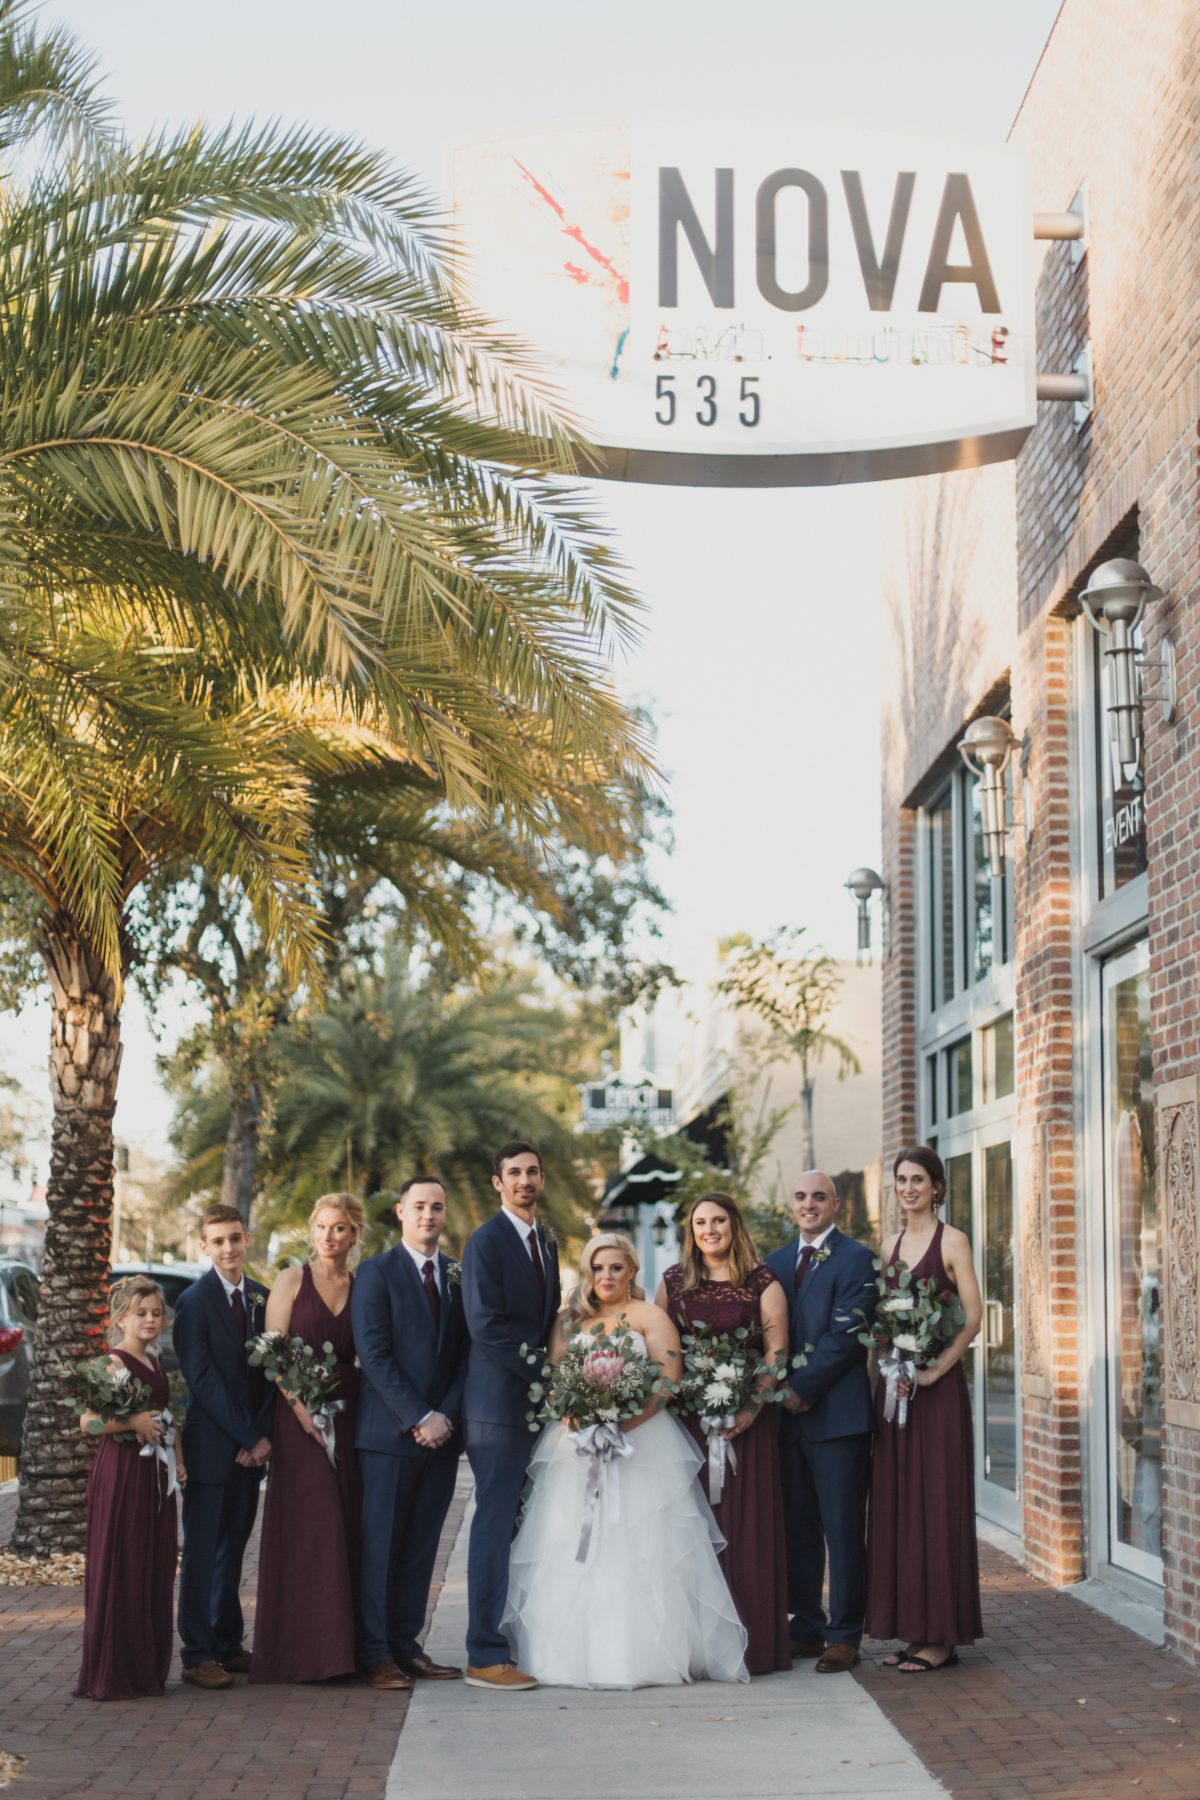 Burgundy and navy wedding party outside NOVA 535 in St. Pete